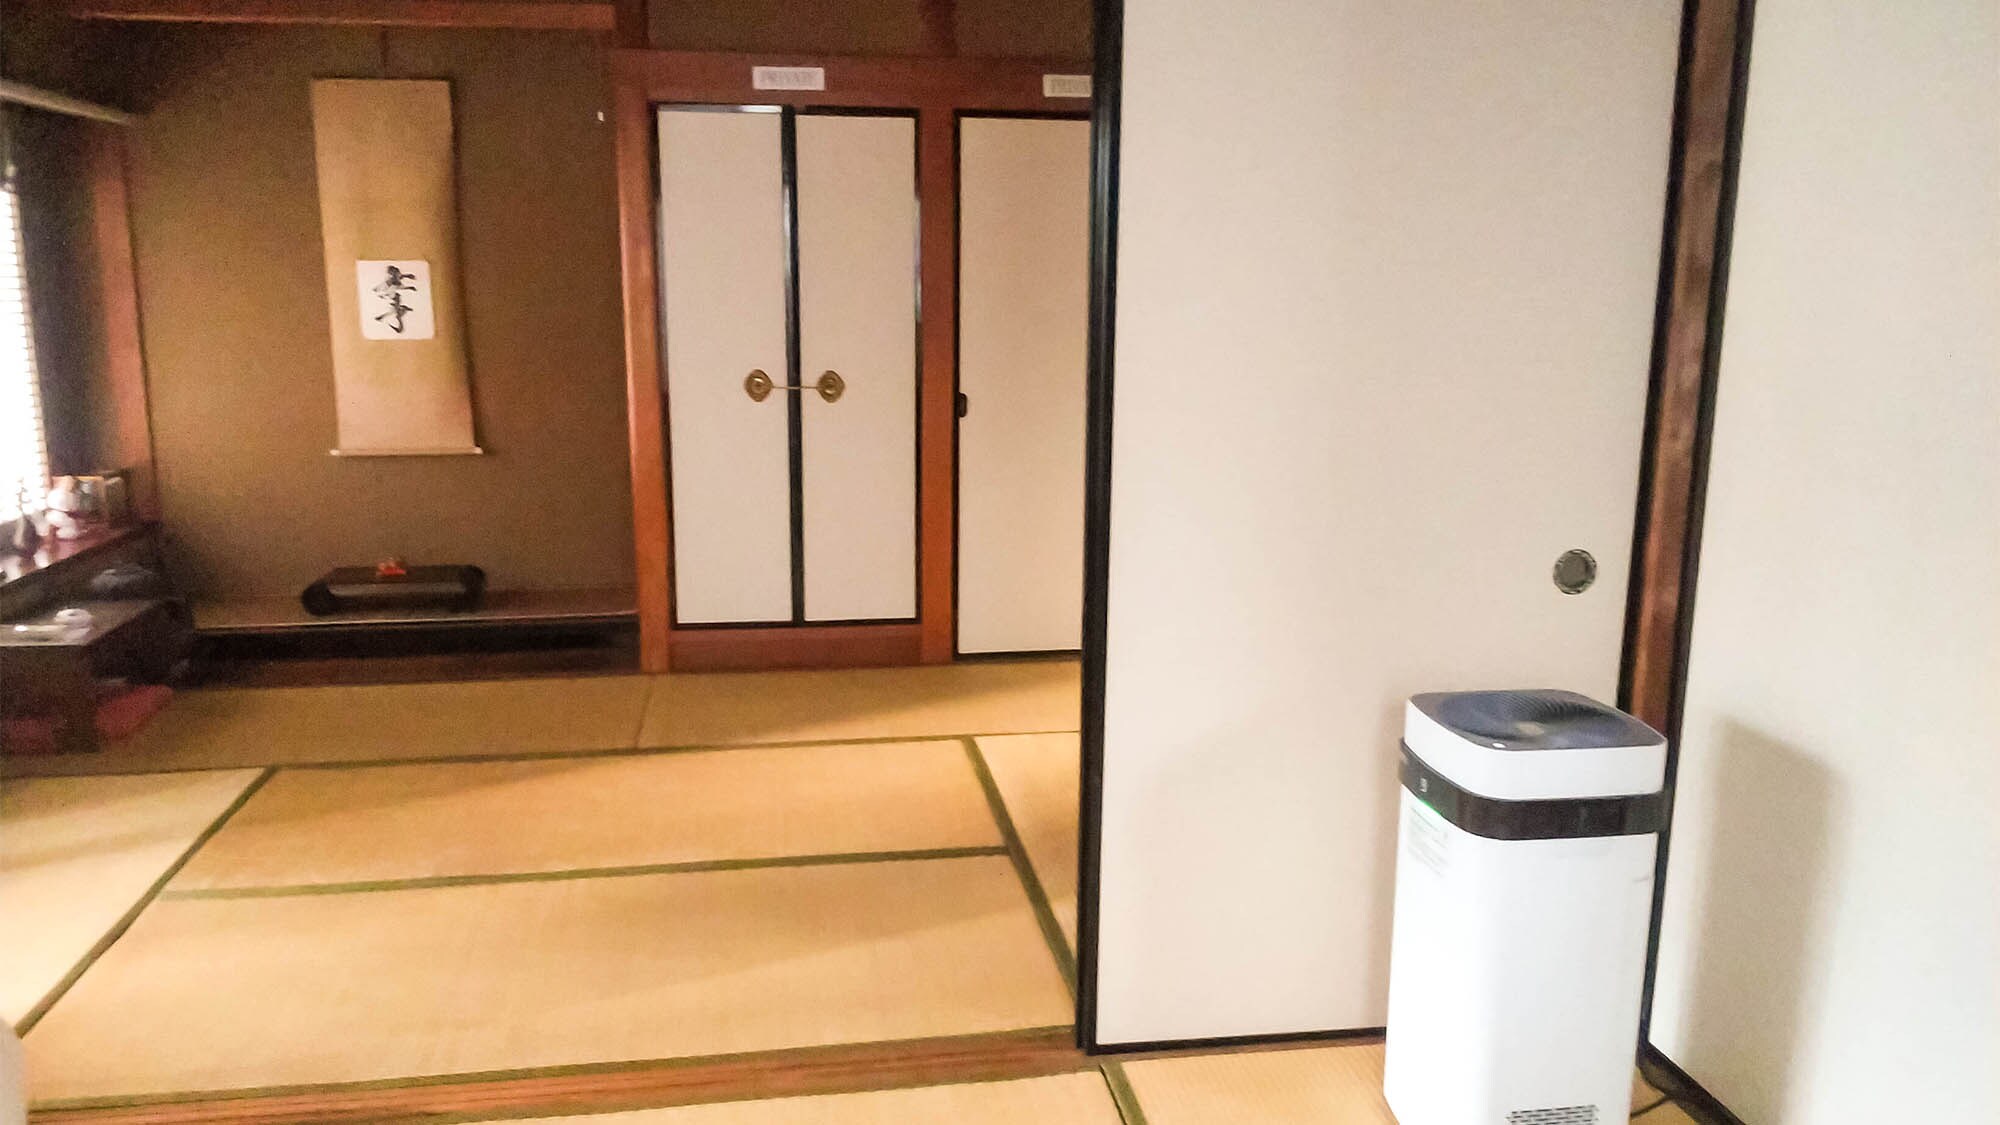 ・Fusuma (sliding doors) can be used to separate two rooms.